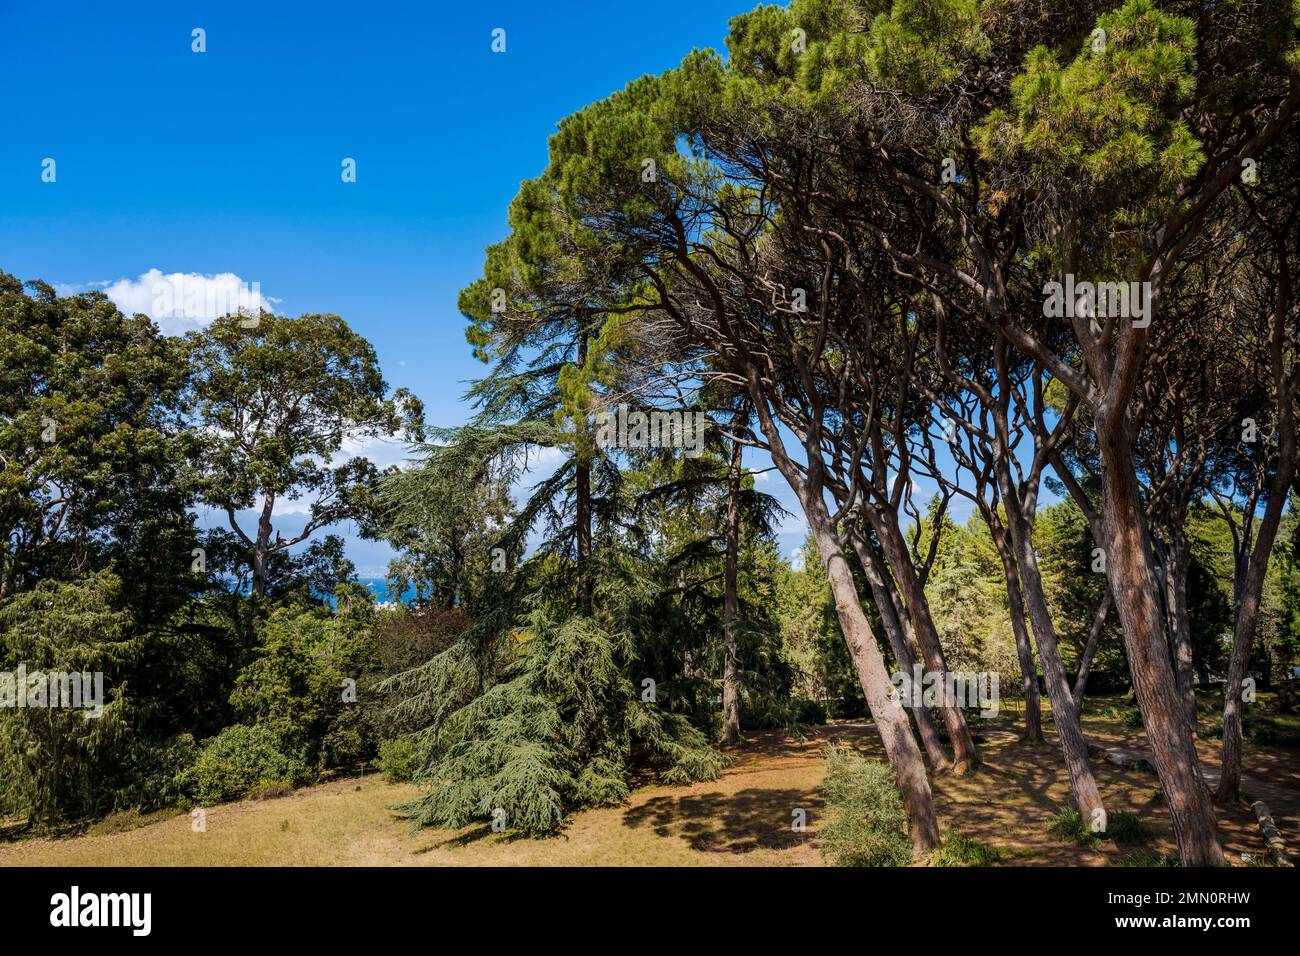 France, Alpes-Maritimes, Antibes, The Botanical Garden of Villa Thuret (attached to INRAE), labeled Jardin Remarquable (Outstanding Garden) and Remarkable Tree, stone pines or umbrella pines Stock Photo